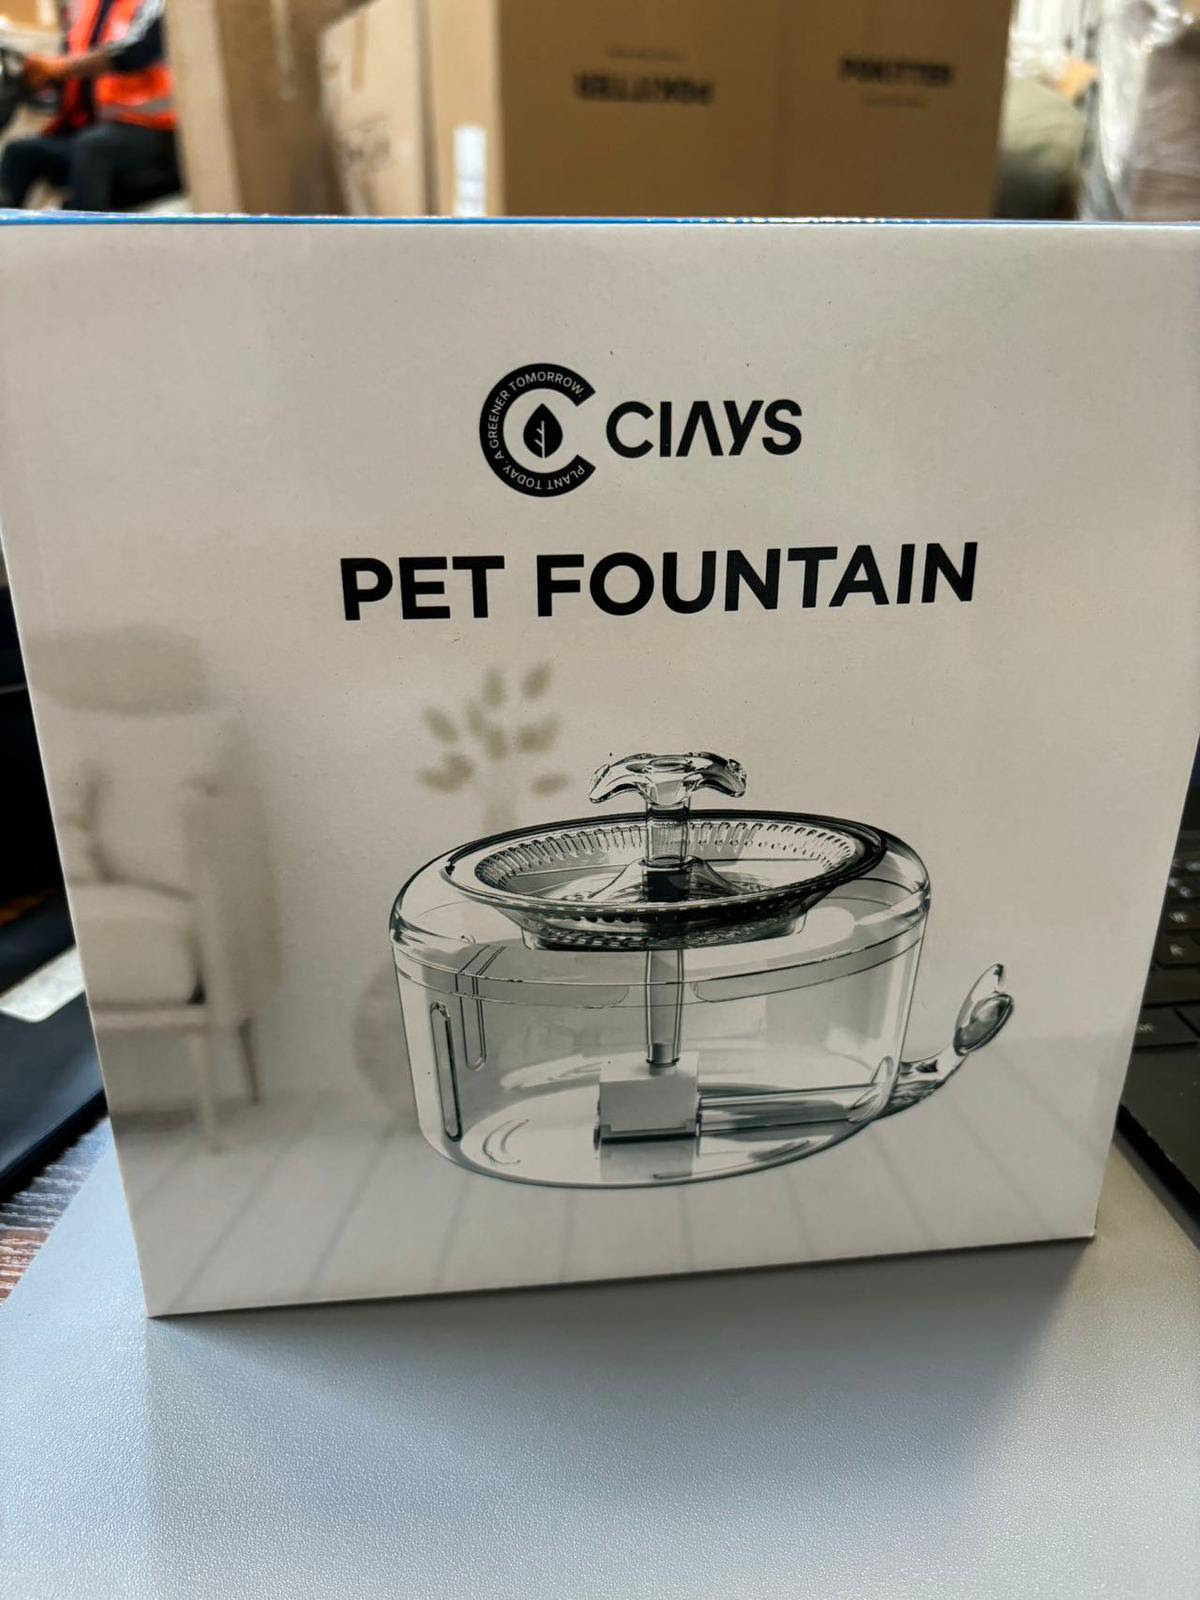 Ciays Automatic 81oz Pet Water Fountain with LED light.  300 units. EXW Los Angeles $9.95 unit.